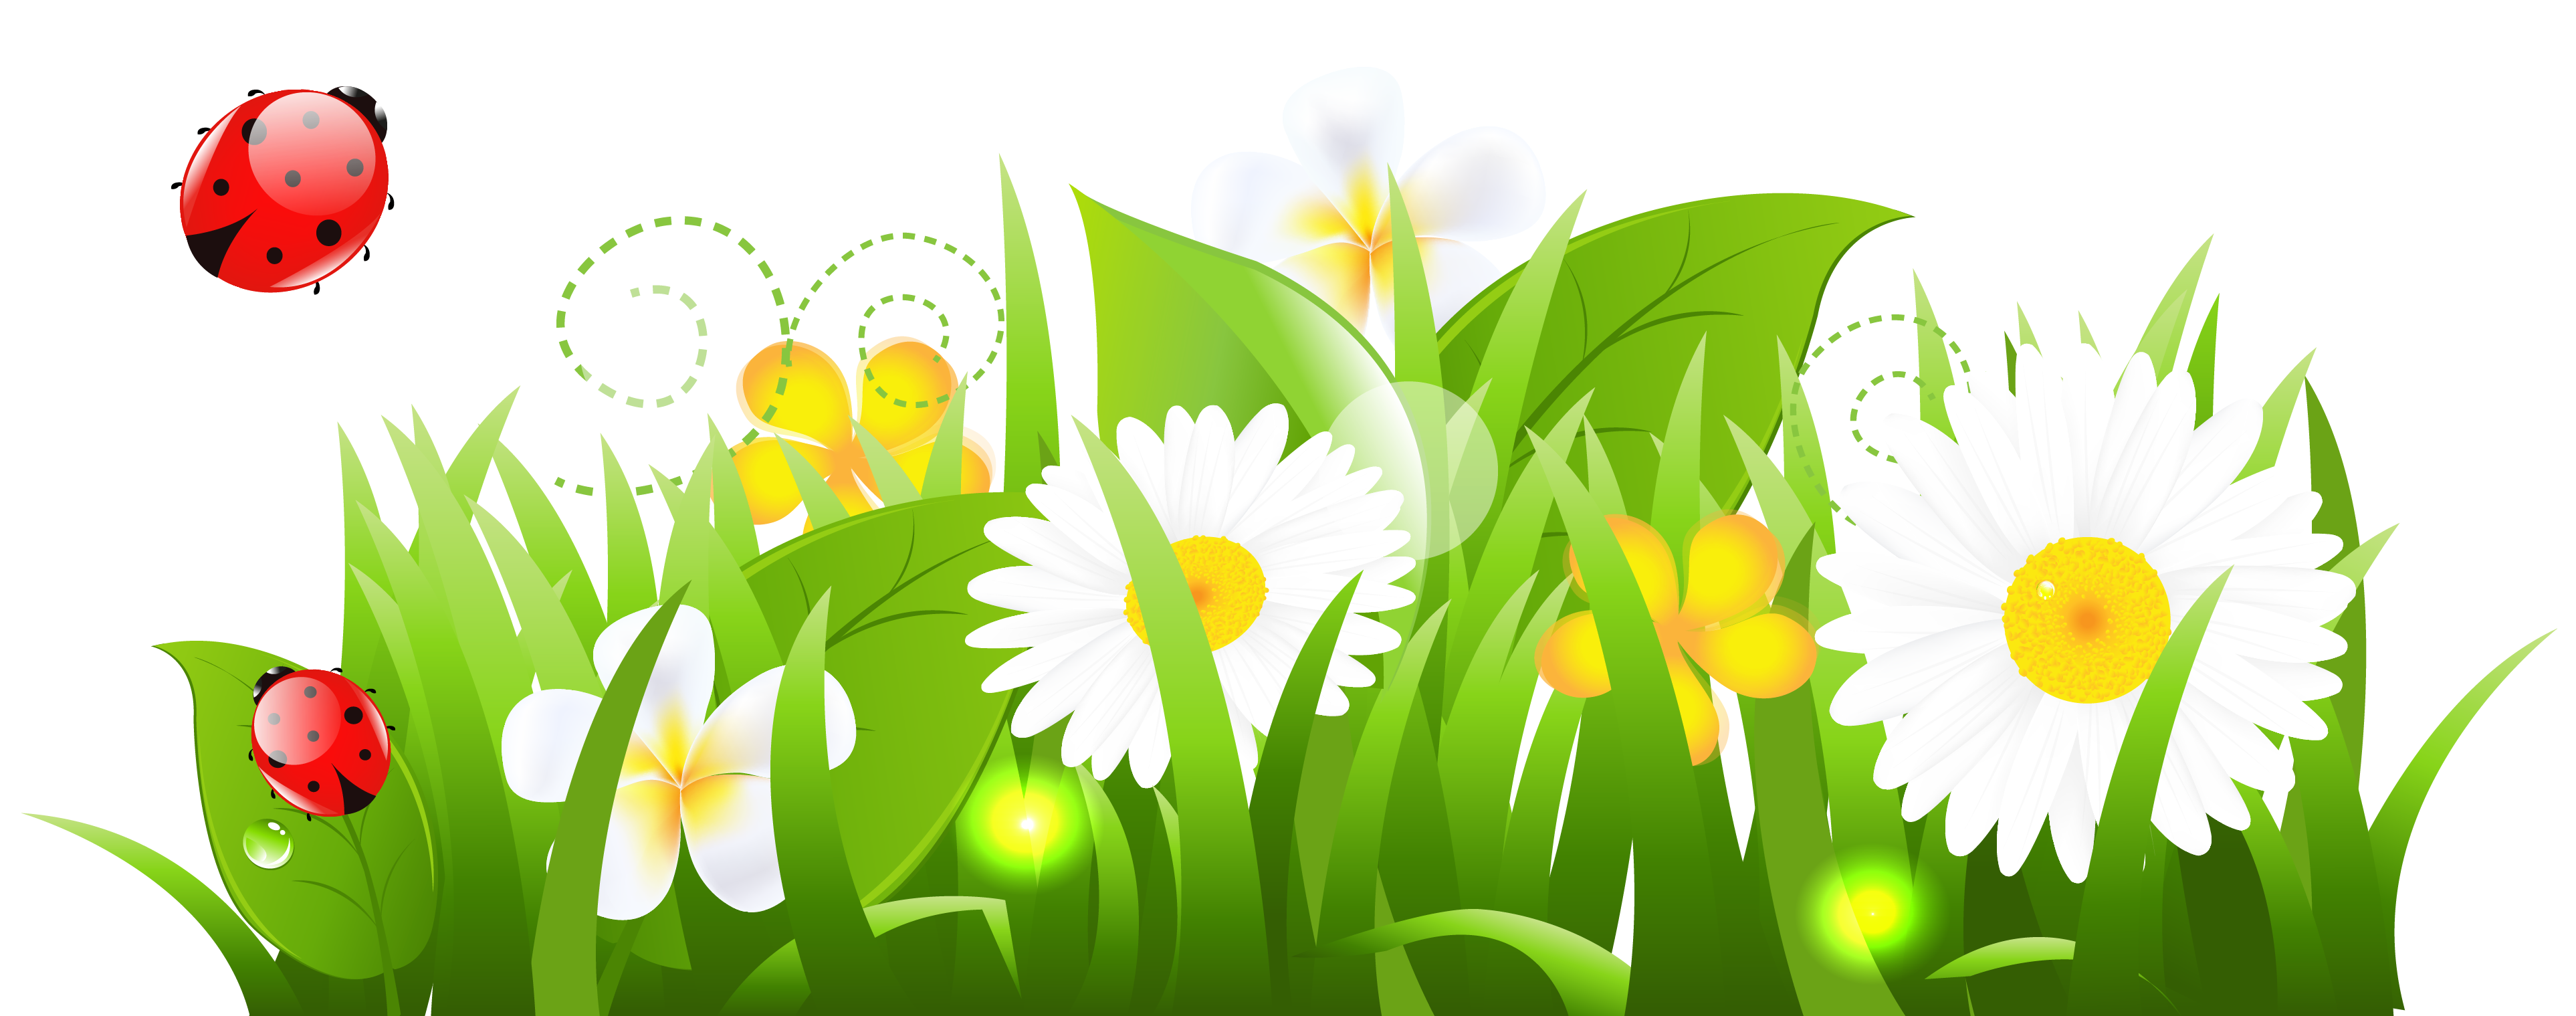 free clipart grass and flowers - photo #3